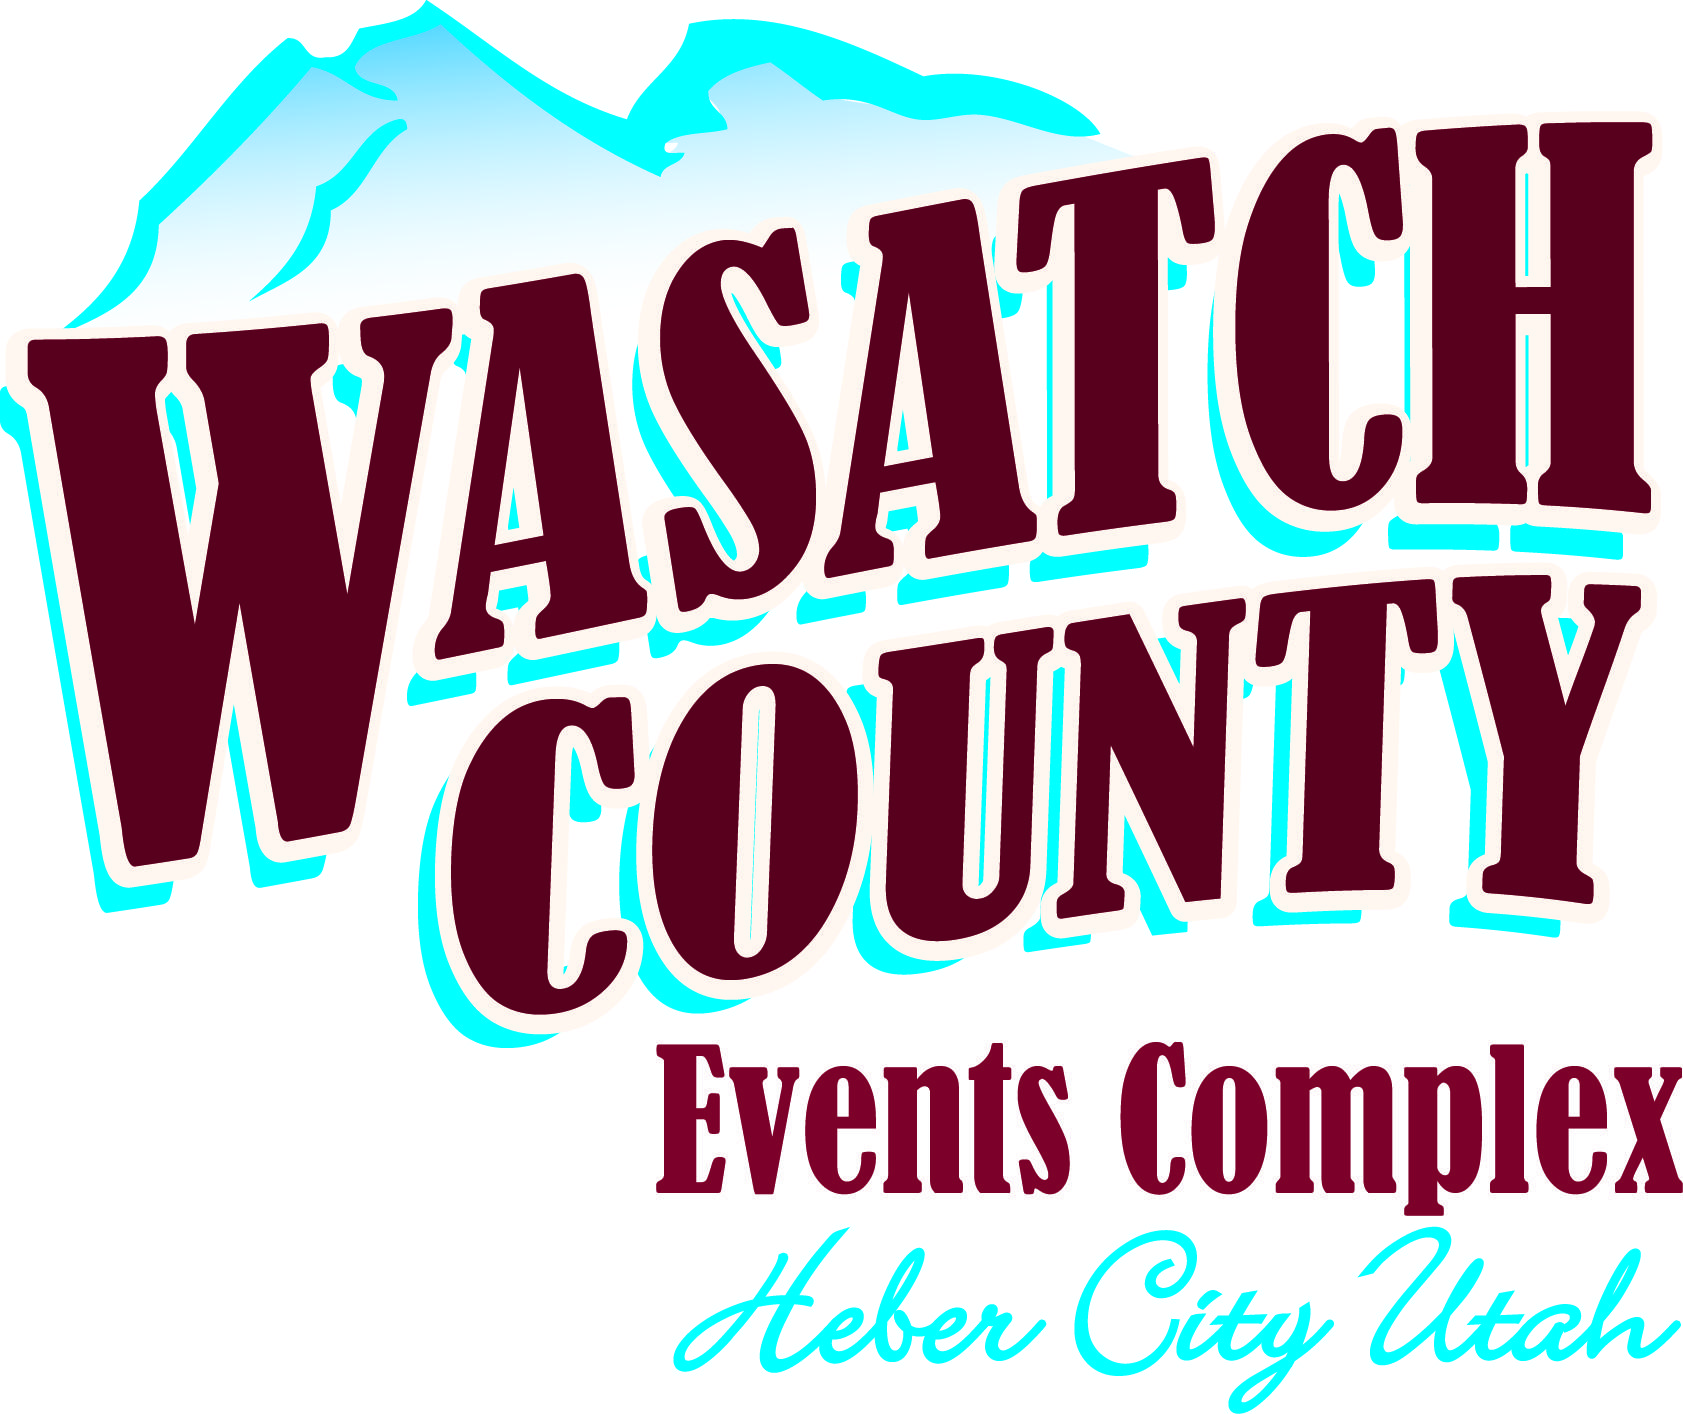 Wasatch County Special Events Center Logo